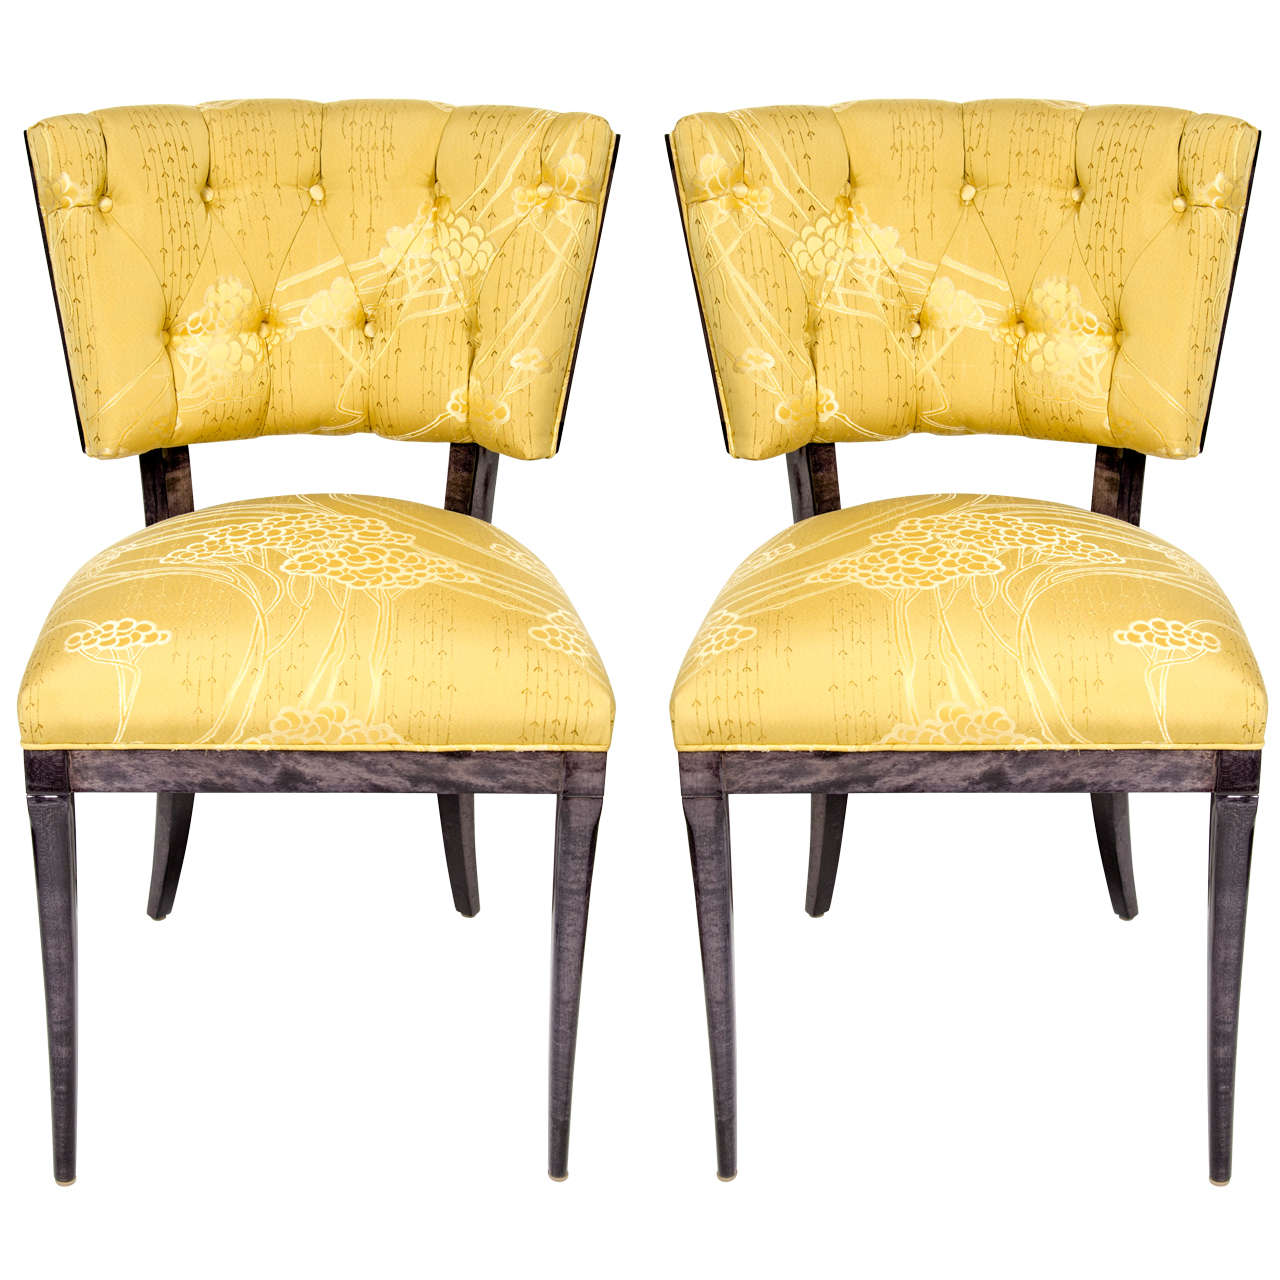 Pair of Mid-Century Klismos Style Chairs in the Manner of Billy Haines